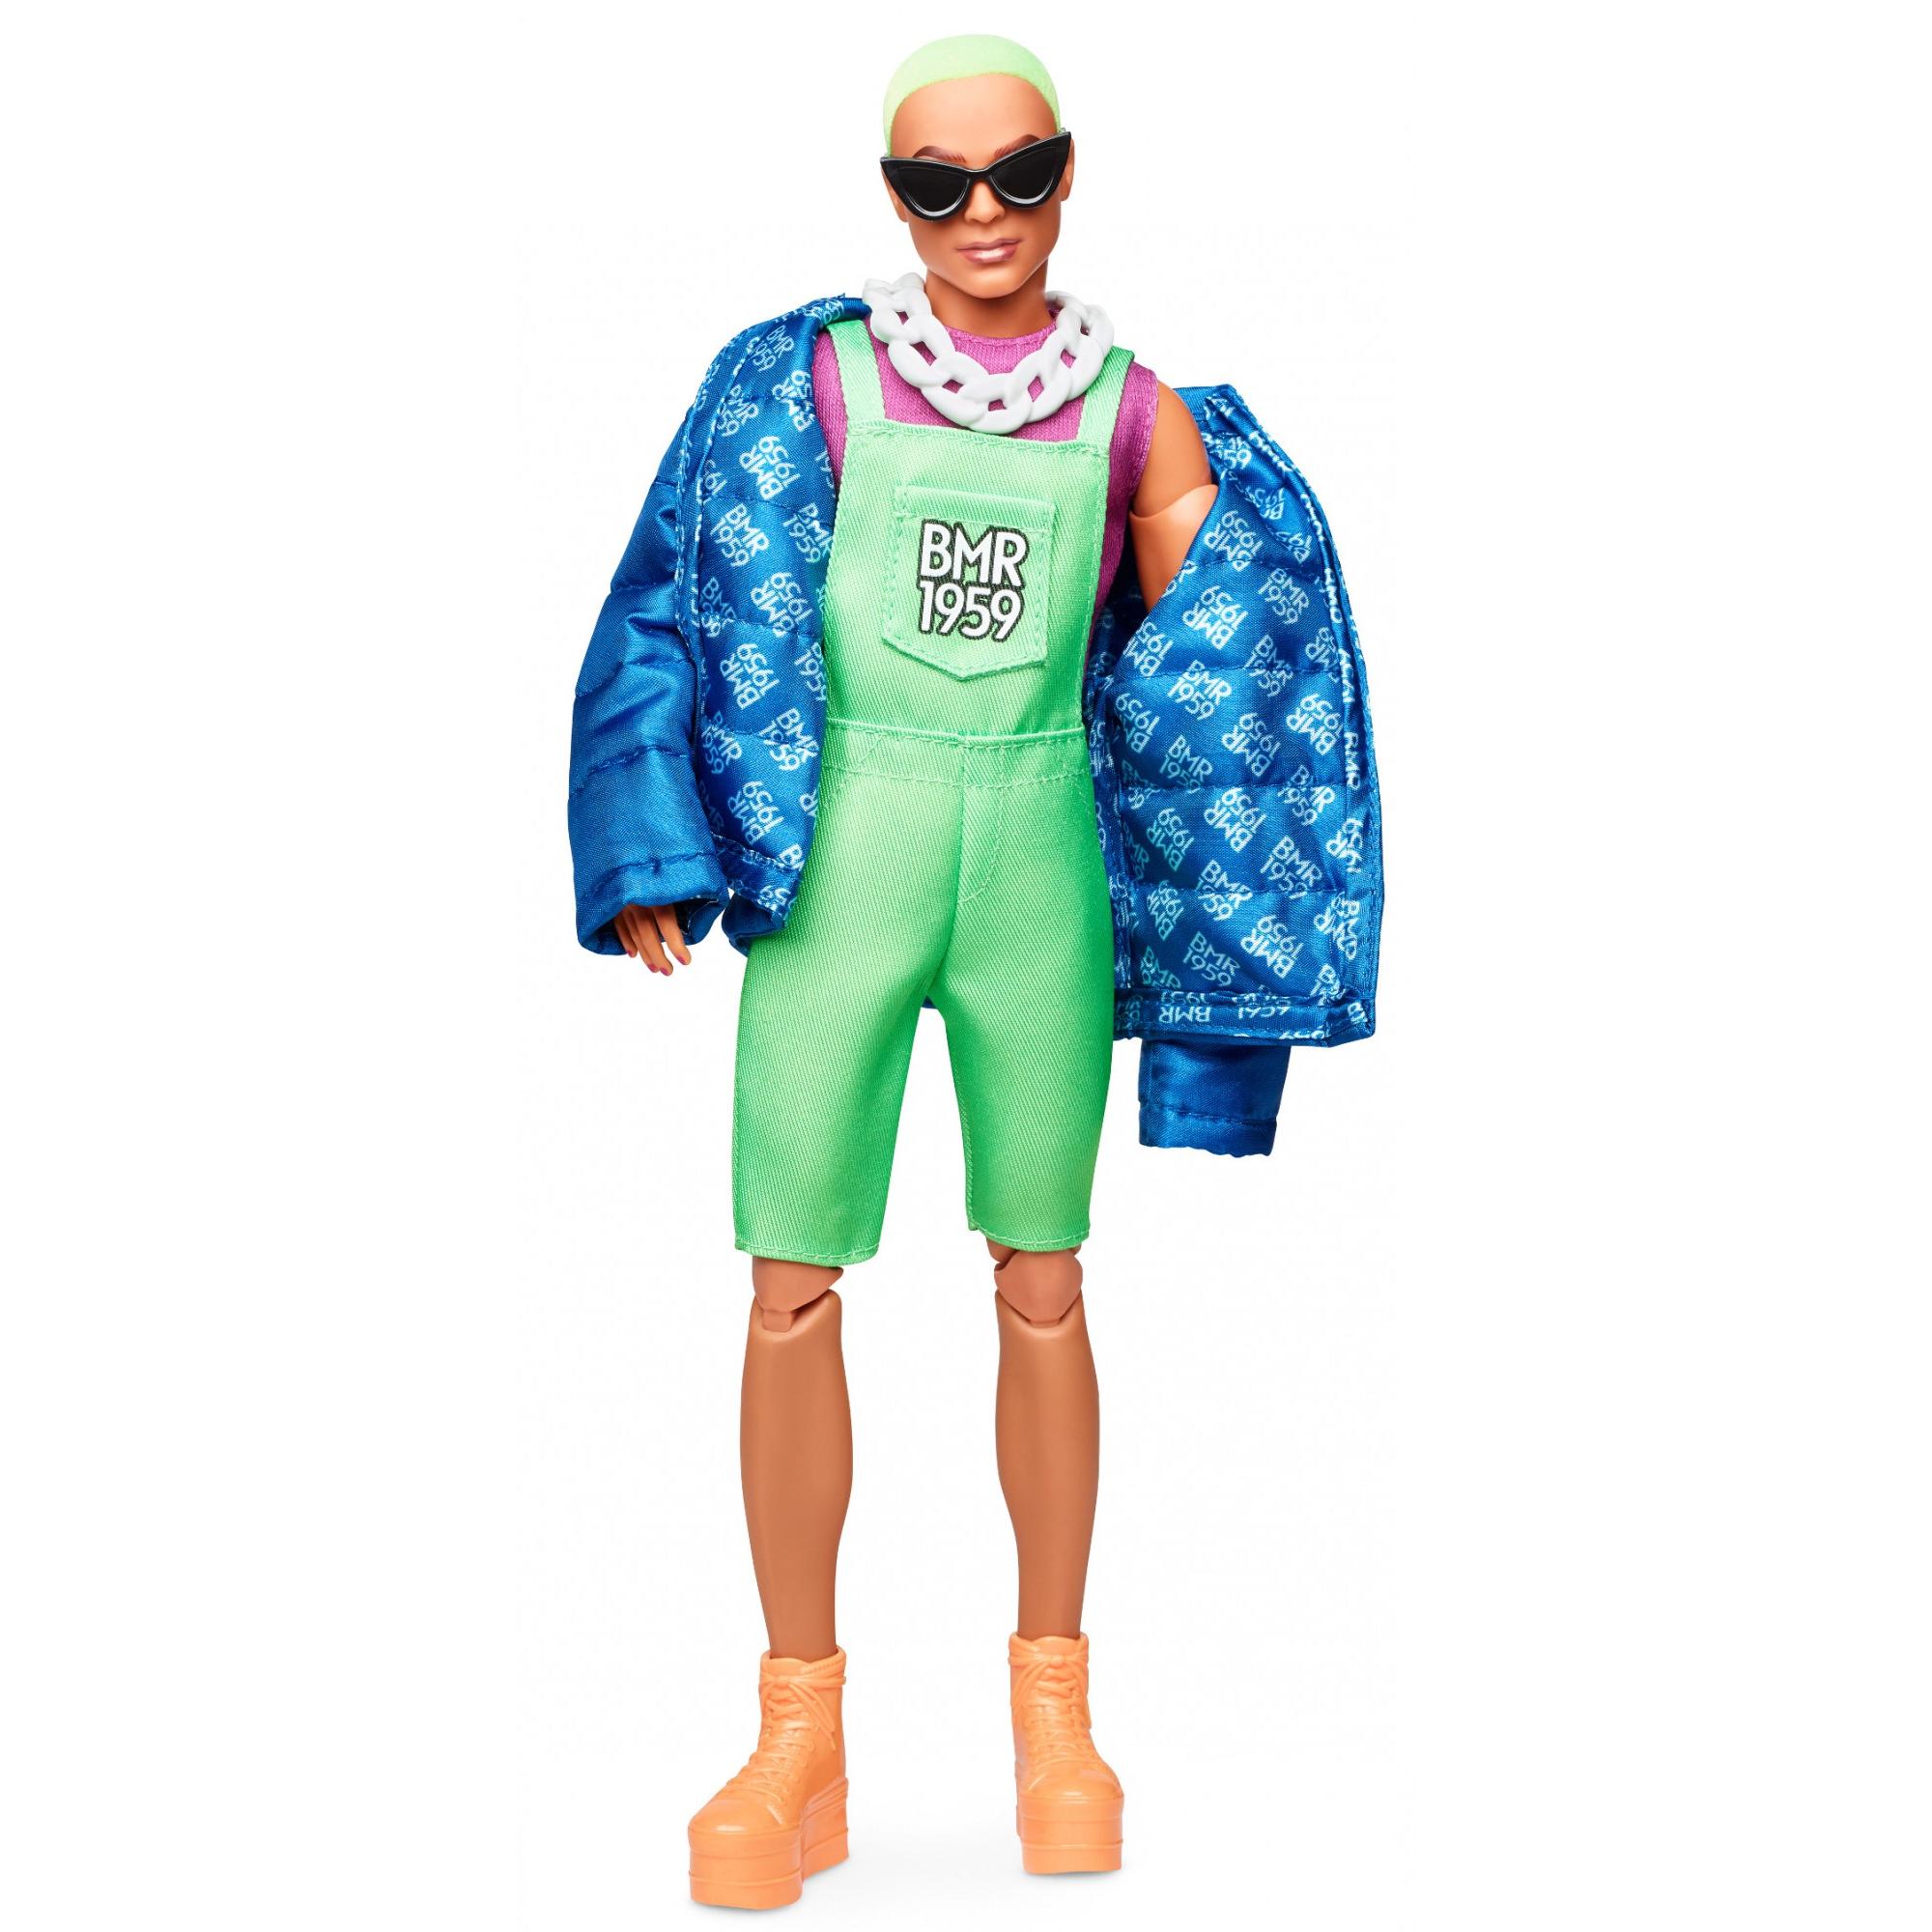 Barbie Bmr1959 Doll - Neon Overalls & Puffer Jacket - image 1 of 7